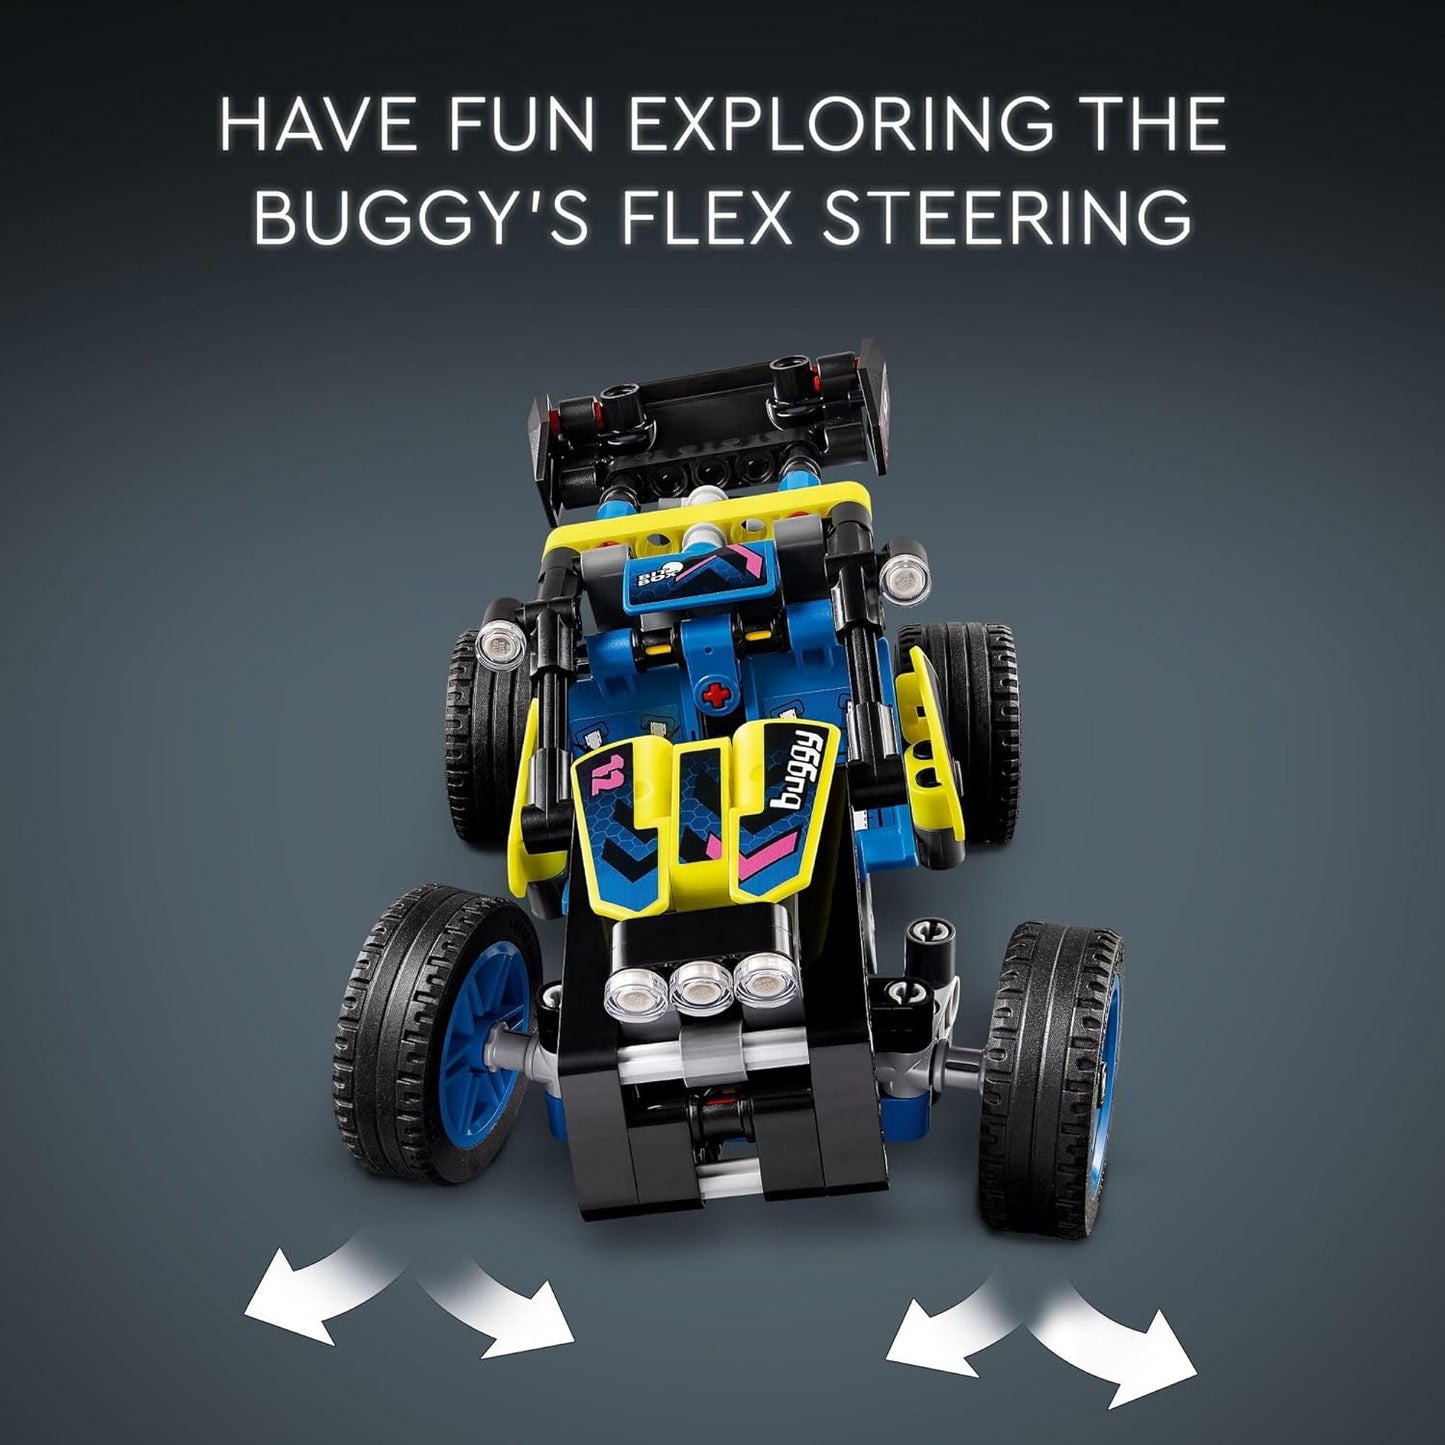 Technic Off-Road Race Buggy Buildable Car Toy, Cool Toy for 8 Year Old Boys, Girls and Kids Who Love Rally Contests, Race Car Toy Featuring Moving 4-Cylinder Engine and Working Suspension, 42164